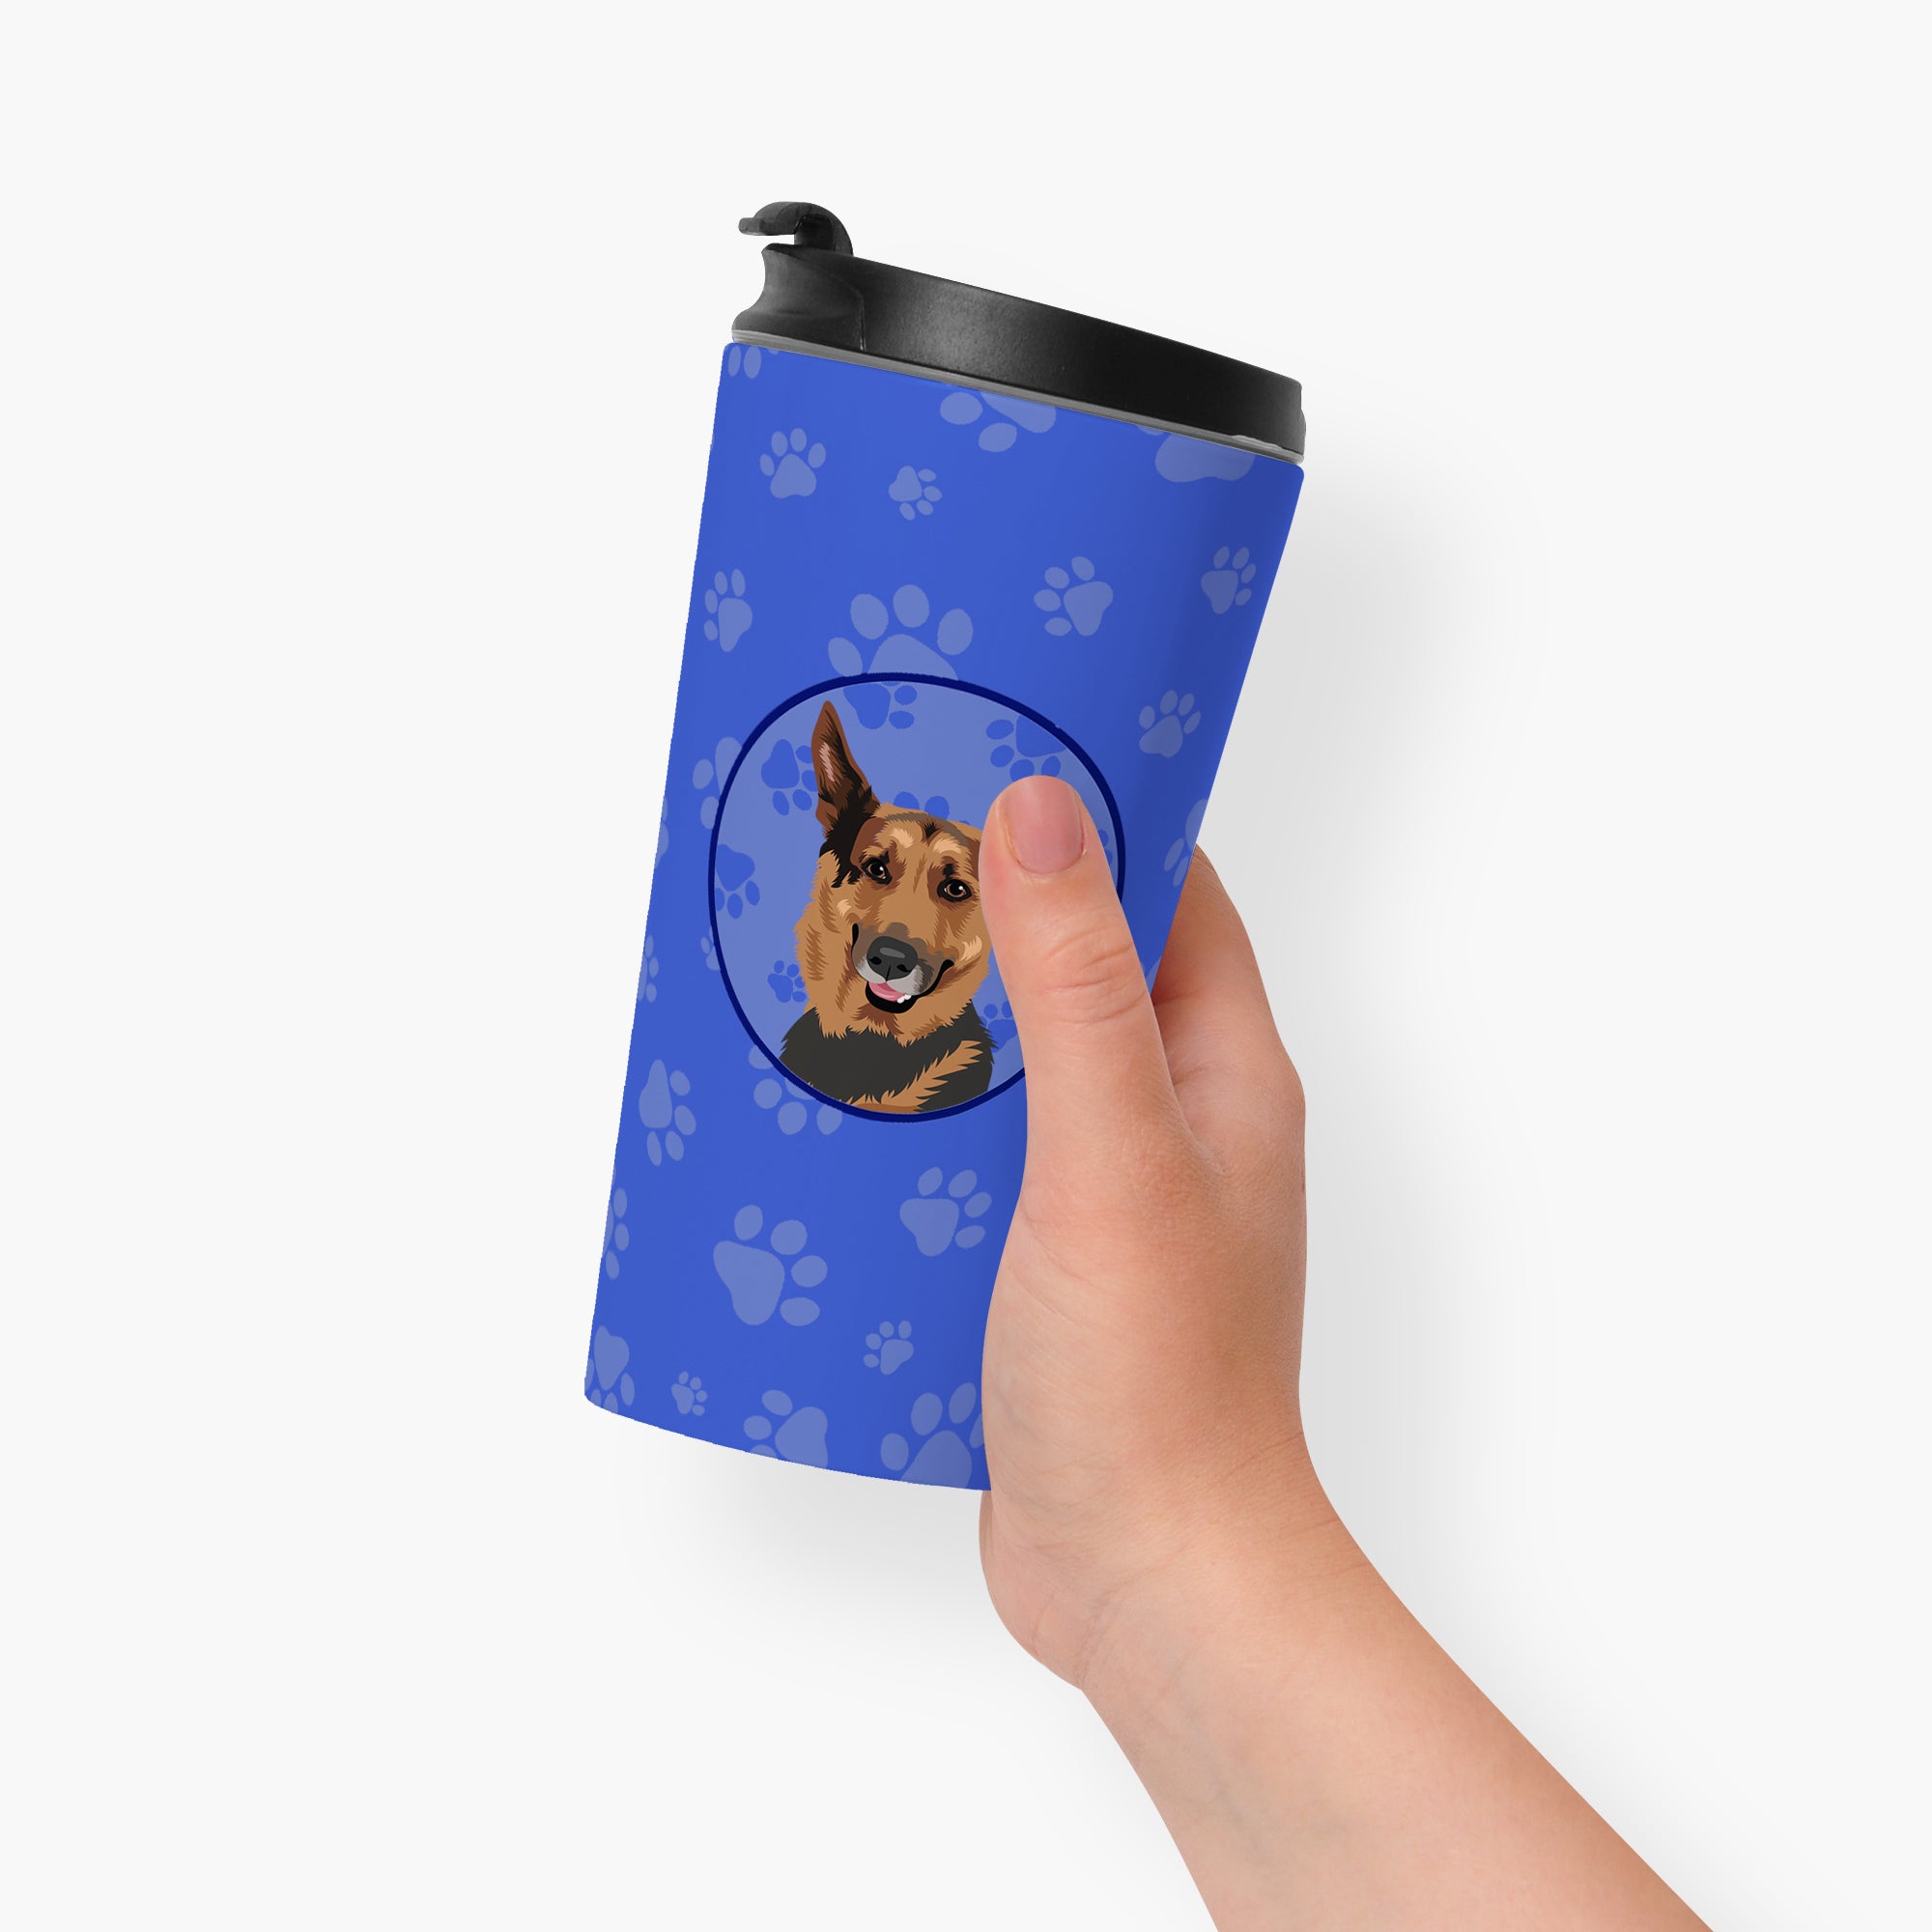 German Shepherd Red Sable  Stainless Steel 16 oz  Tumbler - the-store.com